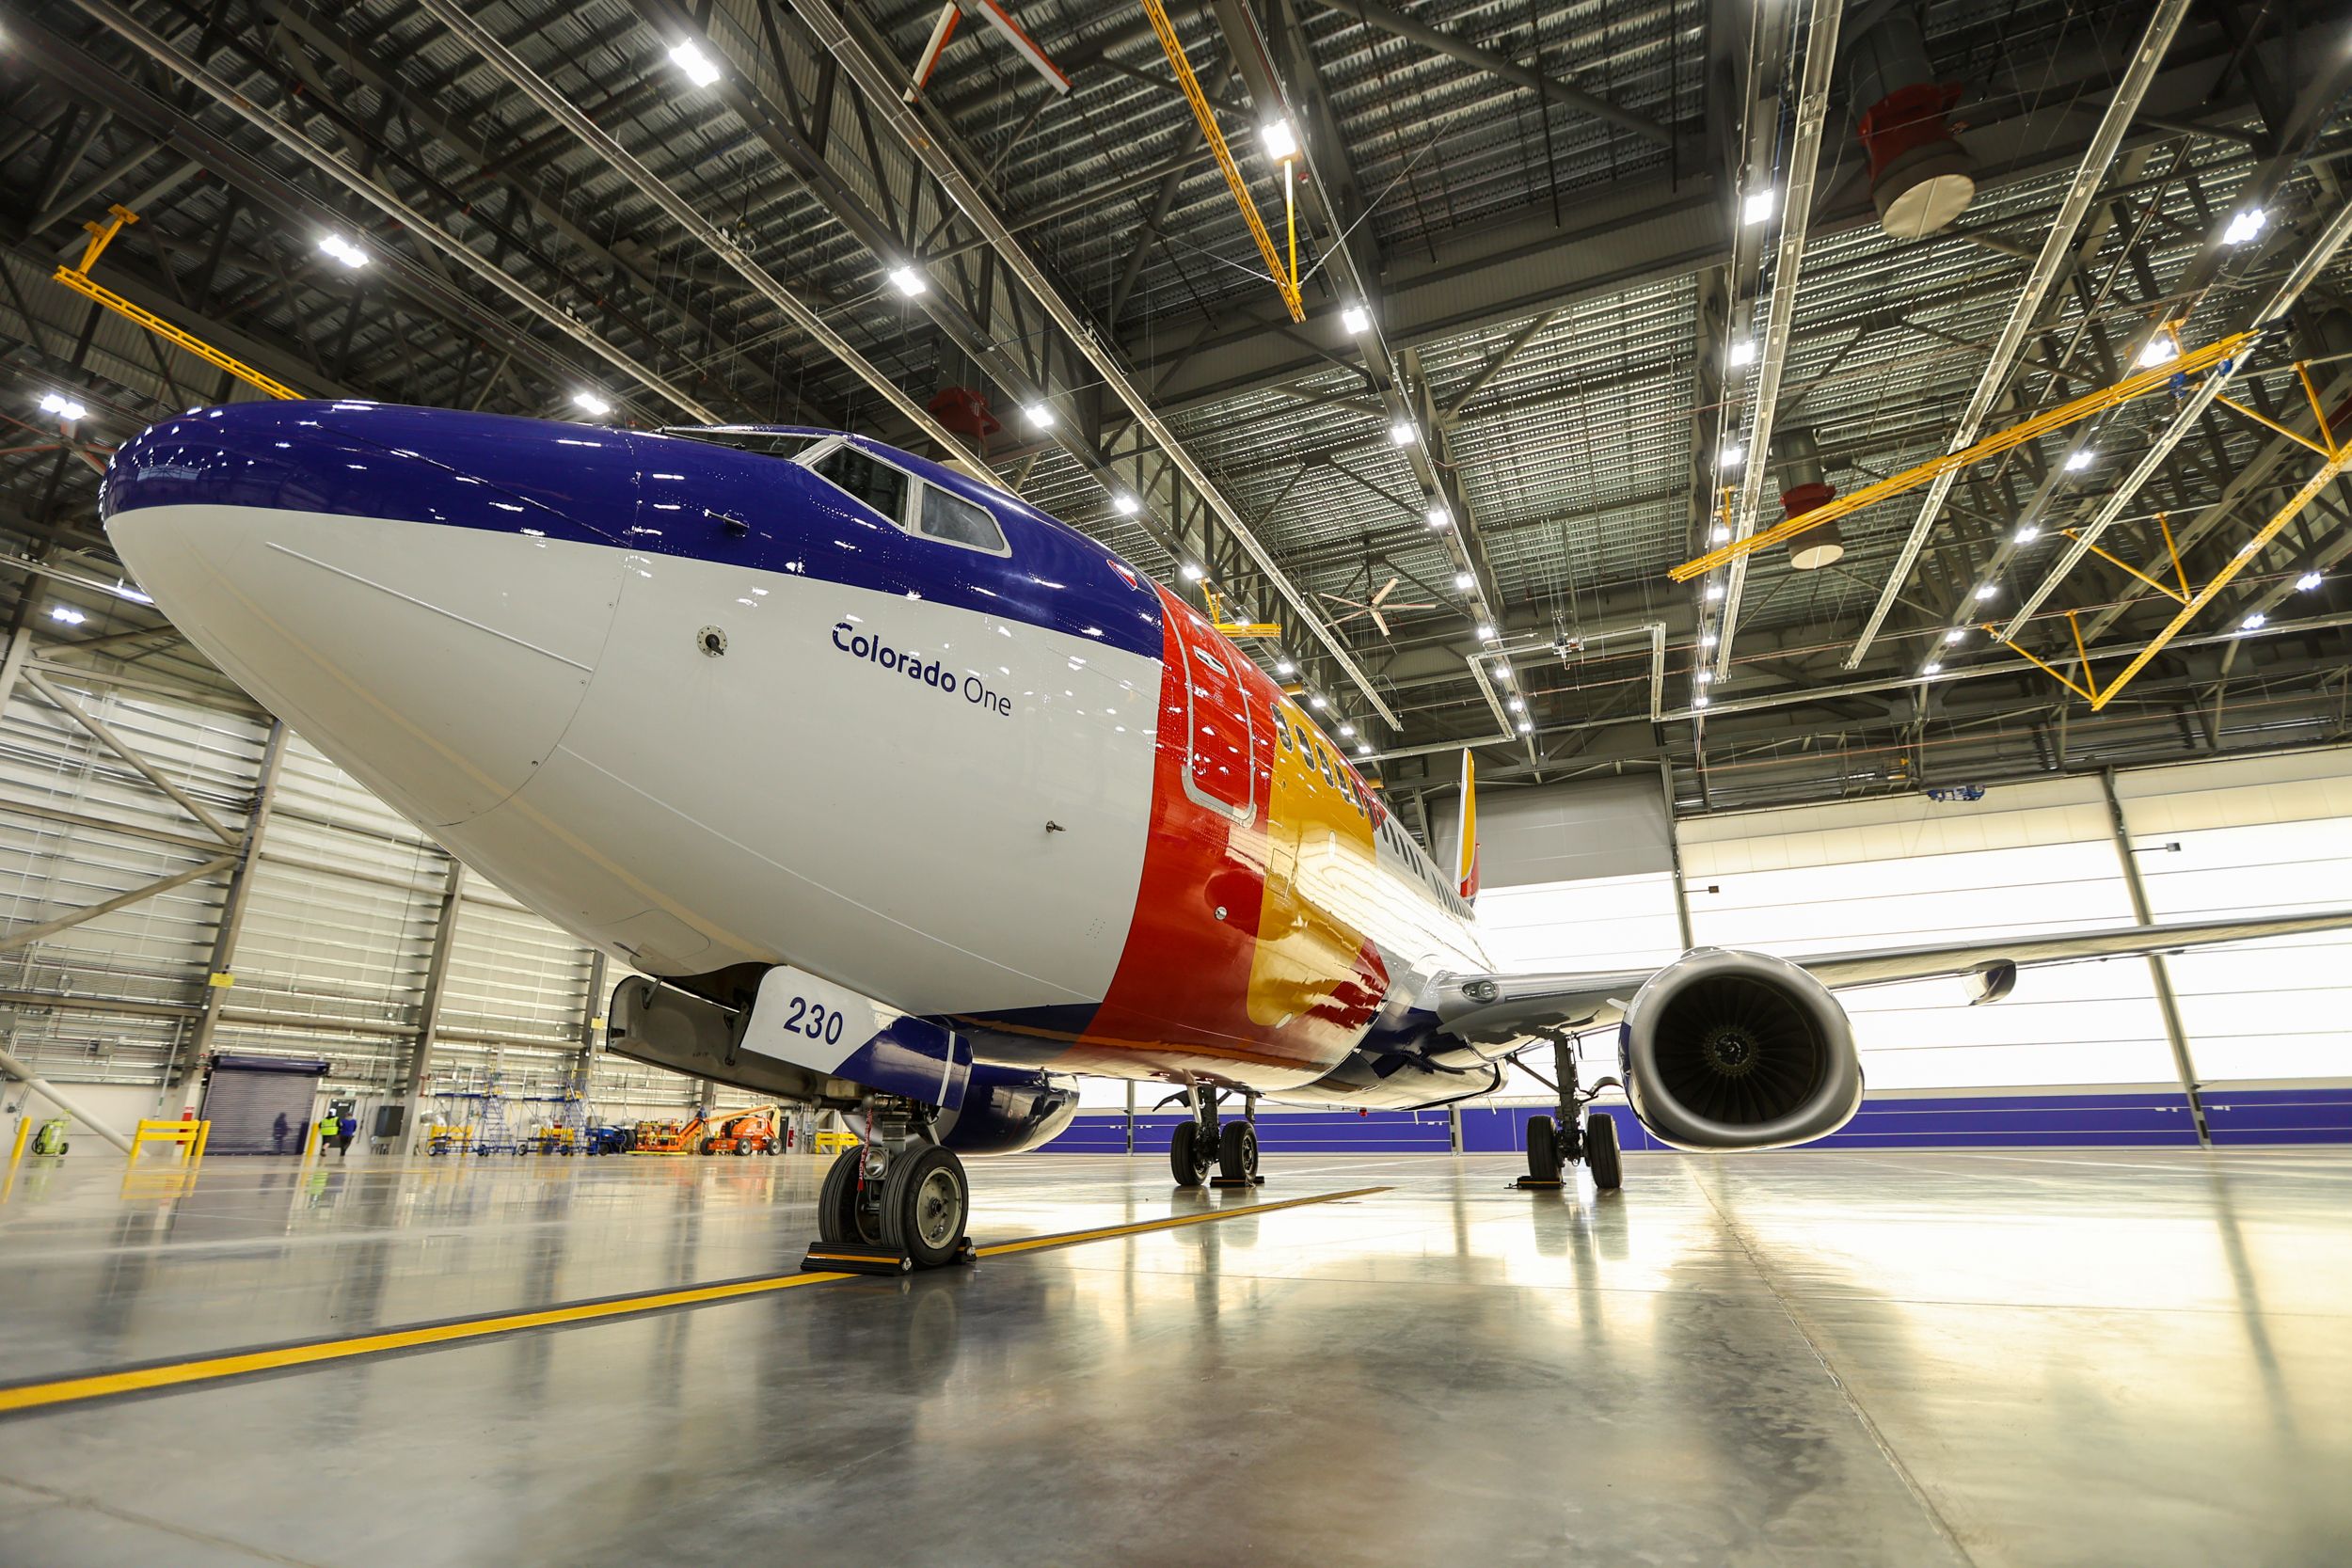 Colorado One parked inside Southwest Airlines' Technical Operations Hangar in Denver, Colorado